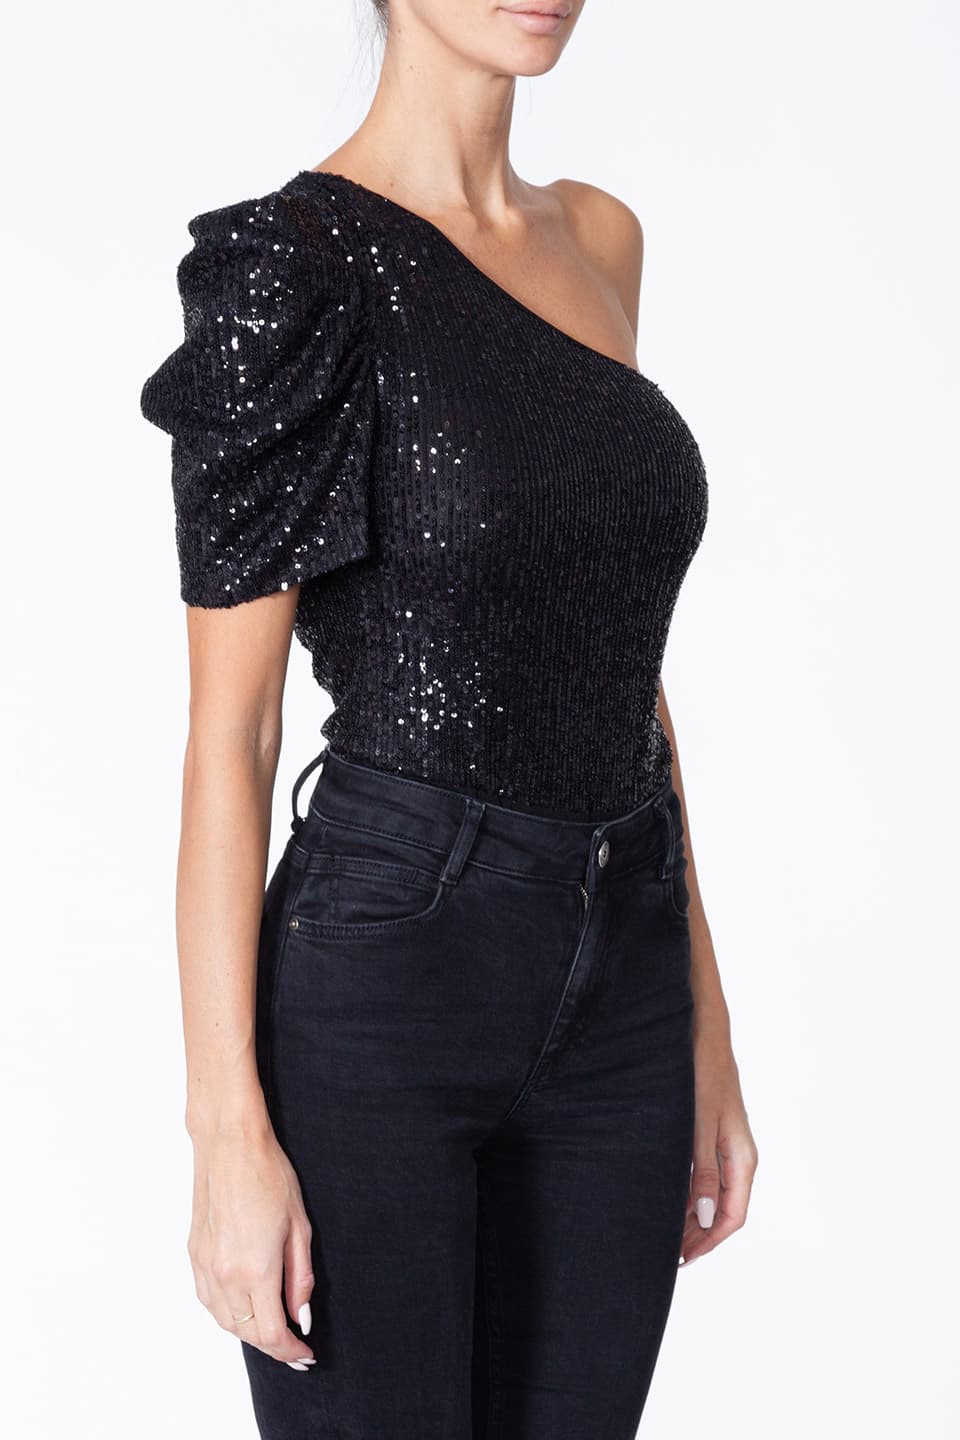 Black body-top from fashion designer collection. Free delivery on luxury brand for online shopping